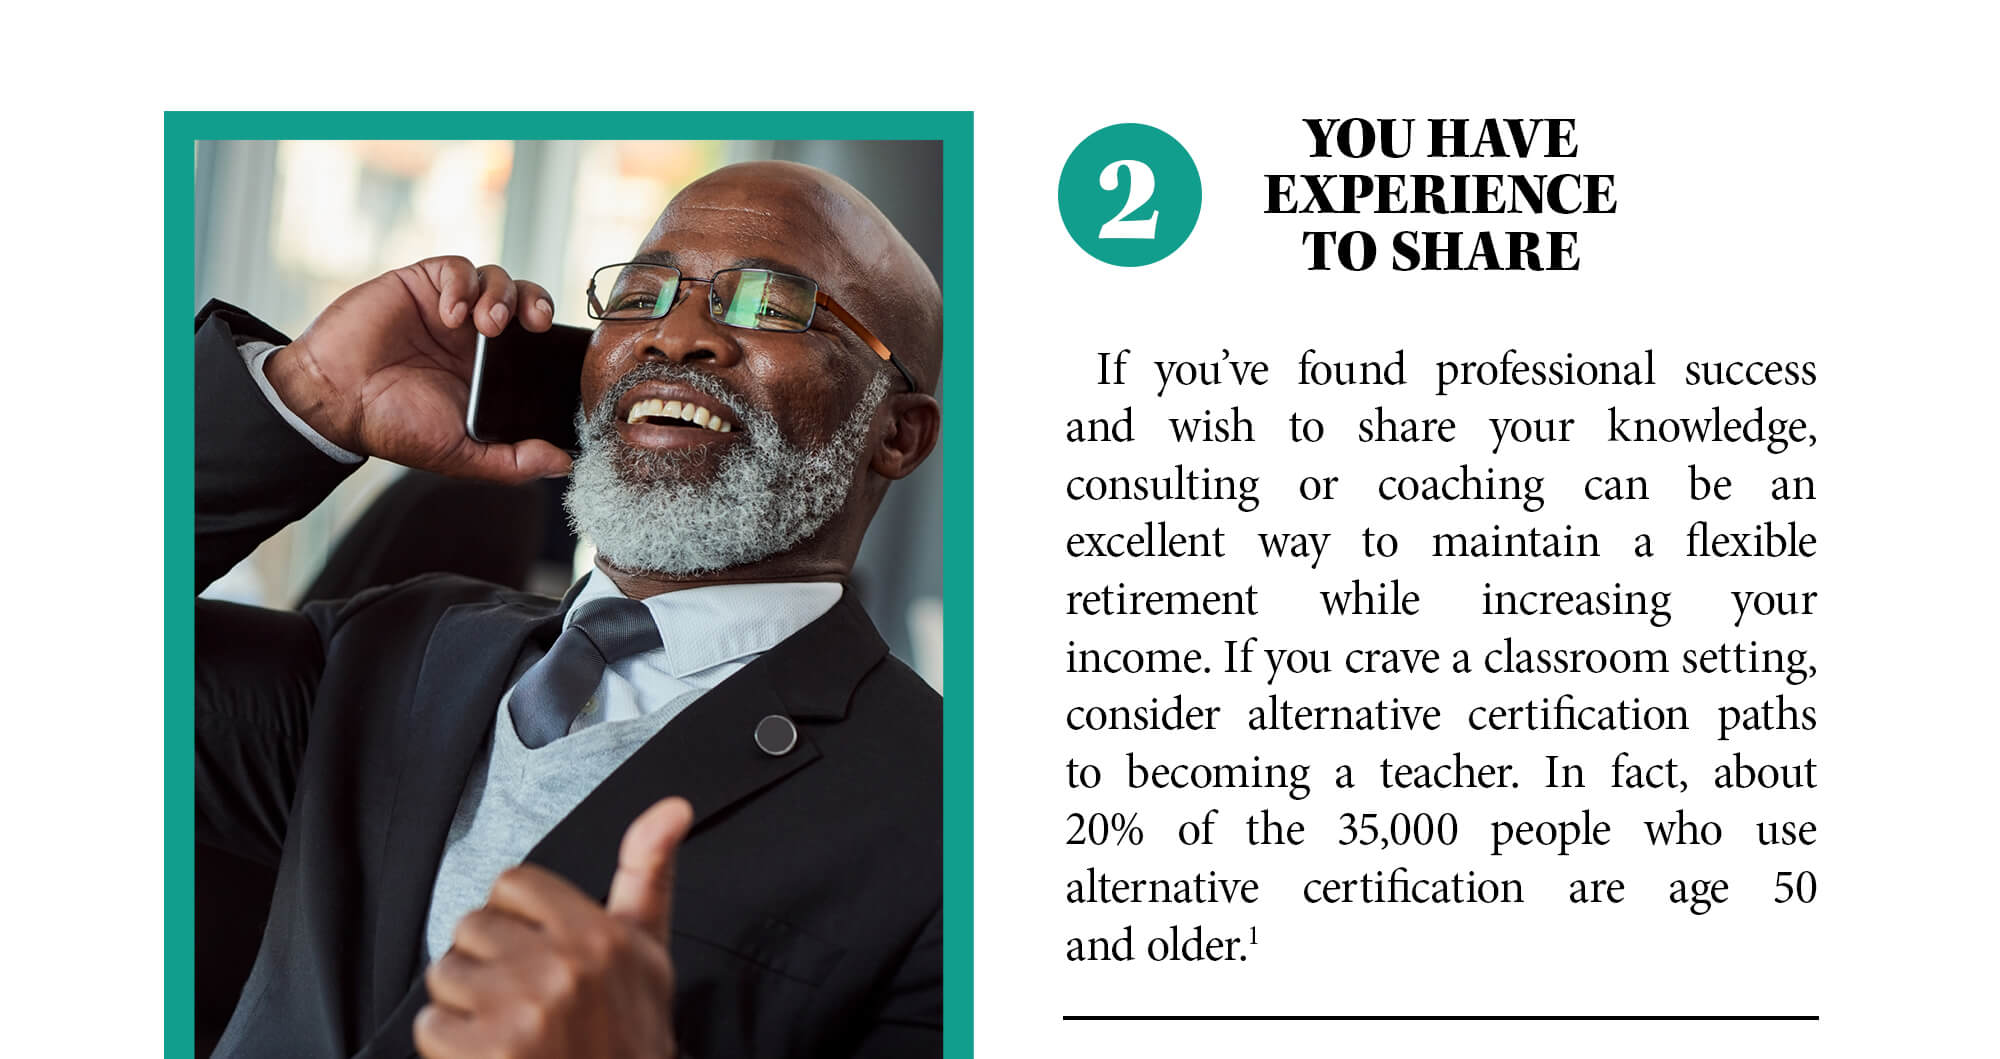 2. You have experience to share. If you’ve found professional success and wish to share your knowledge, consulting or coaching can be an excellent way to maintain a flexible retirement while increasing your income. If you crave a classroom setting, consider alternative certification paths to becoming a teacher. In fact, about 20% of the 35,000 people who use alternative certification are age 50 and older. Source 1.